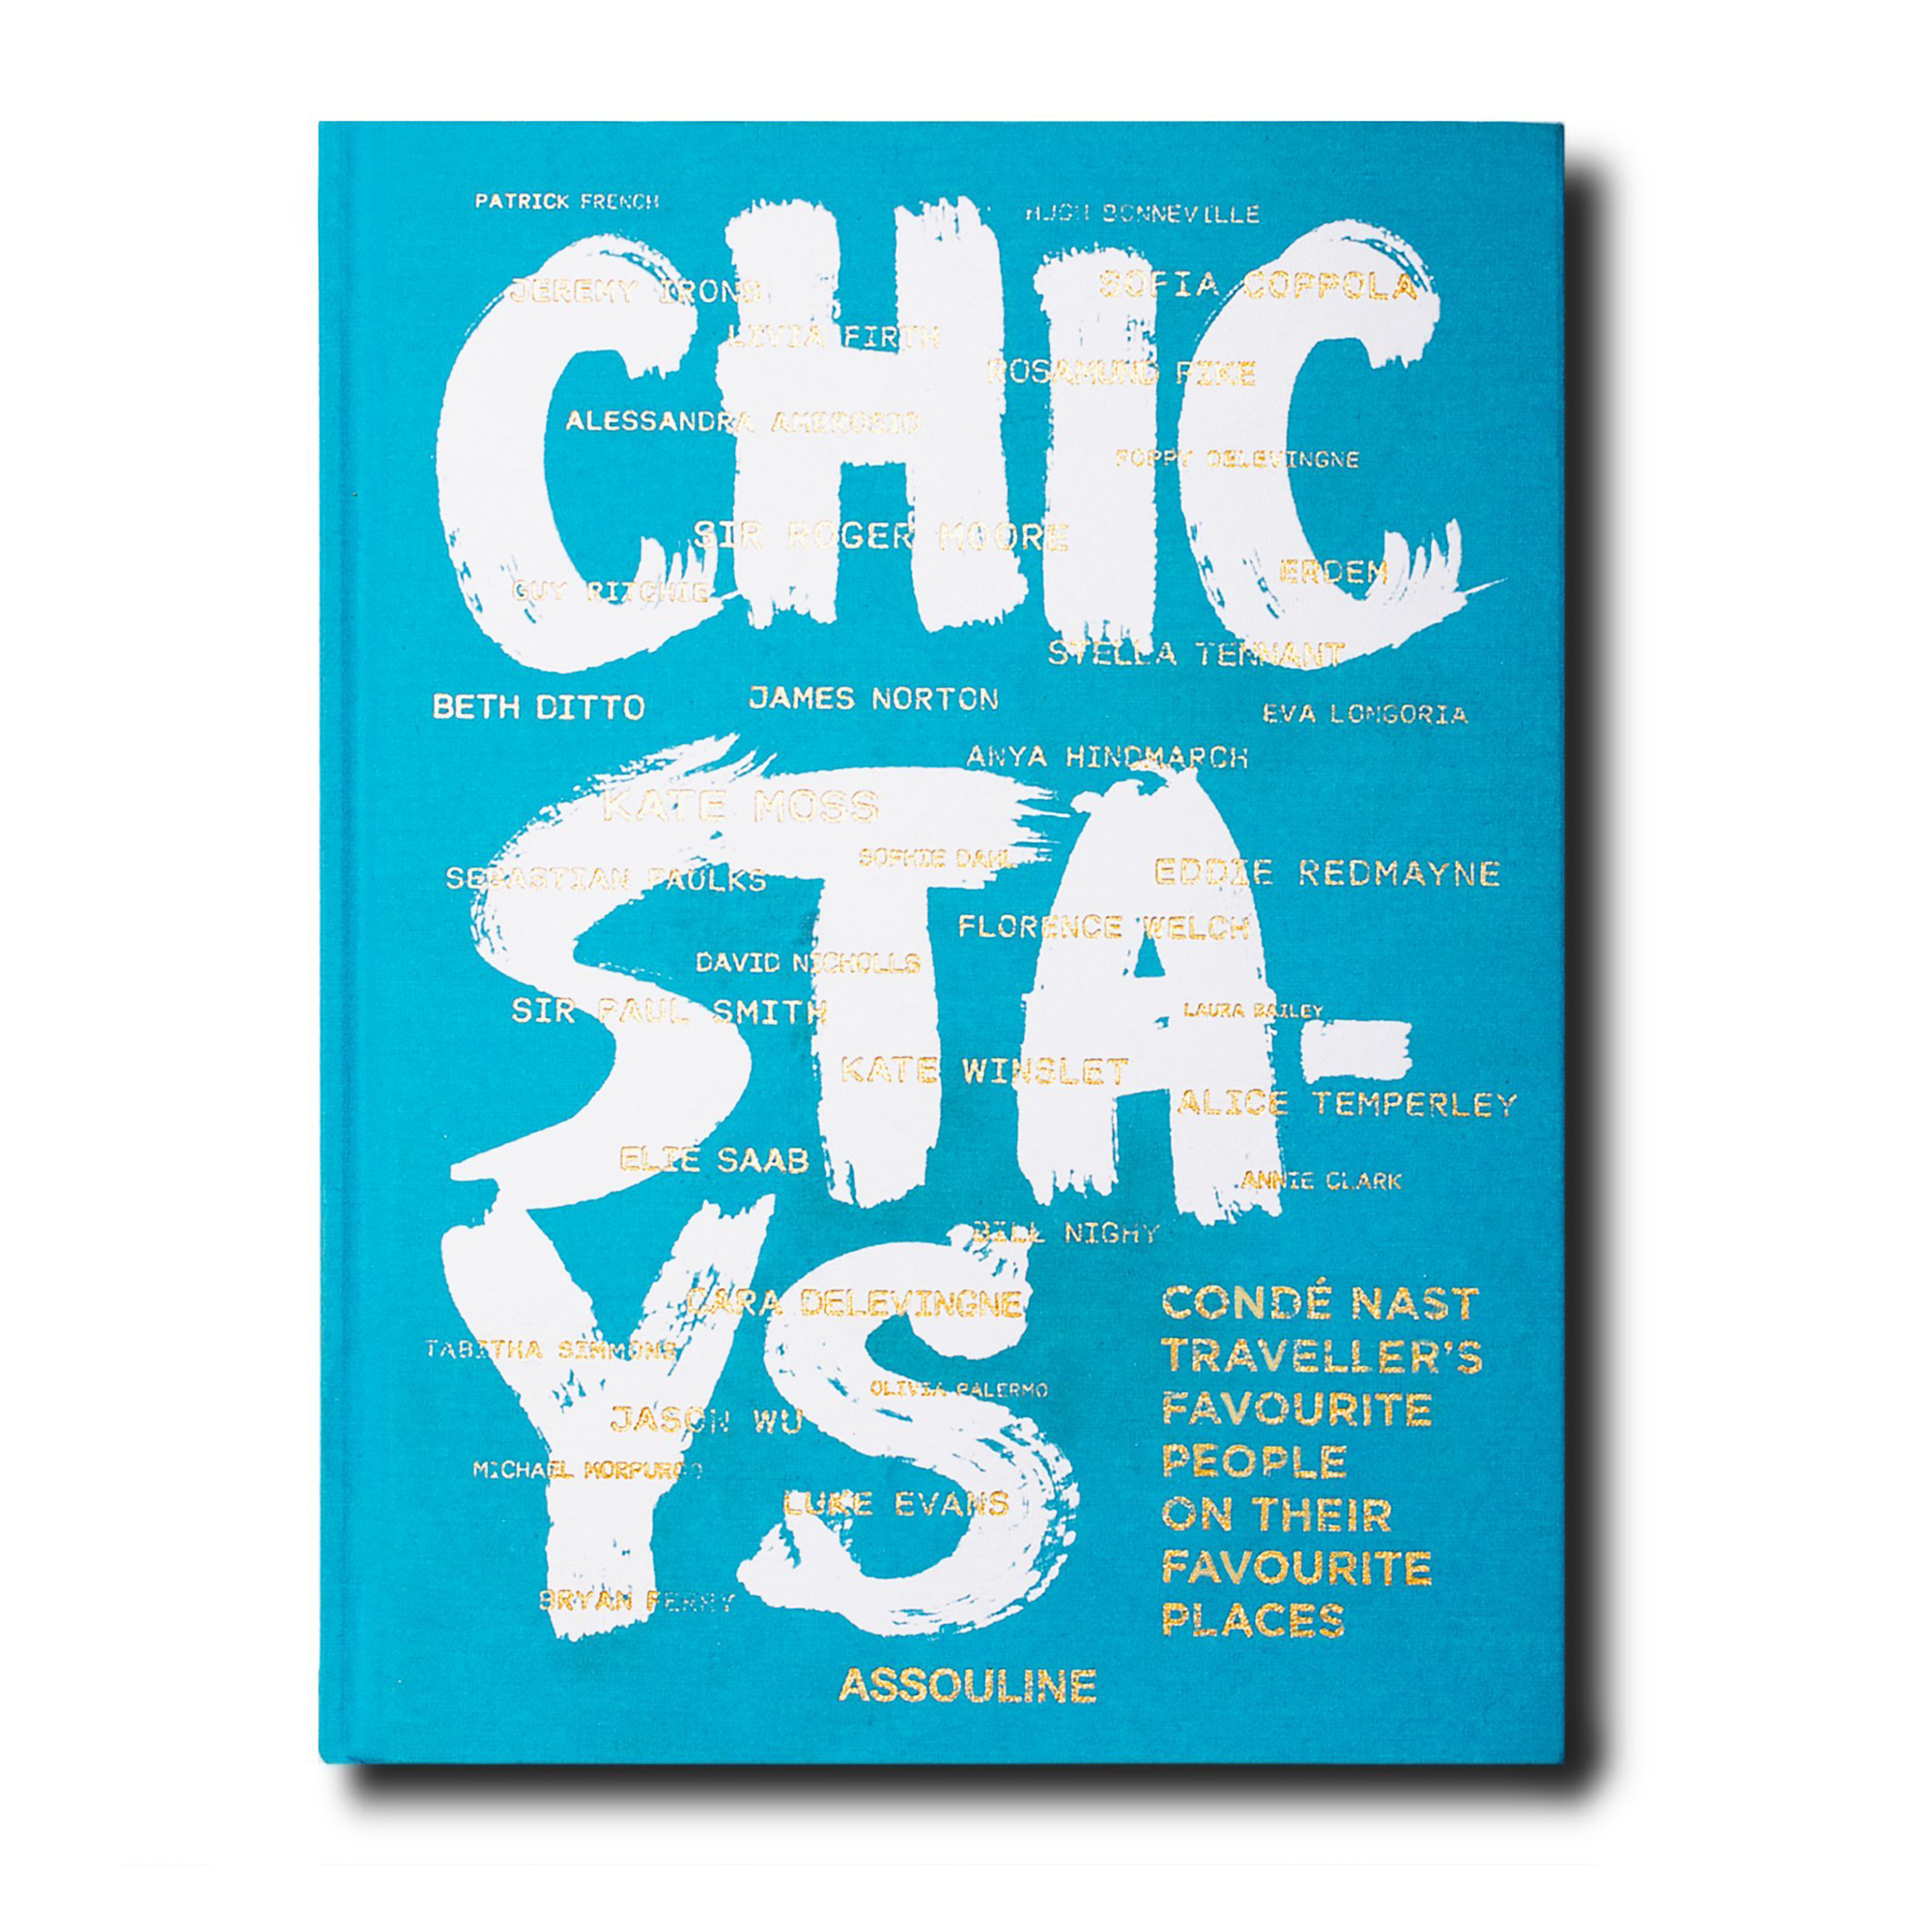 A chic stays book with a blue and white cover, adds a decorative touch to your interior, and features thirty-six stories of breathtaking global locations. Its photography highlights destinations like UXUA Casa Hotel & Spa and the hills of Sri Lanka, inspiring readers to explore these beautiful spots.